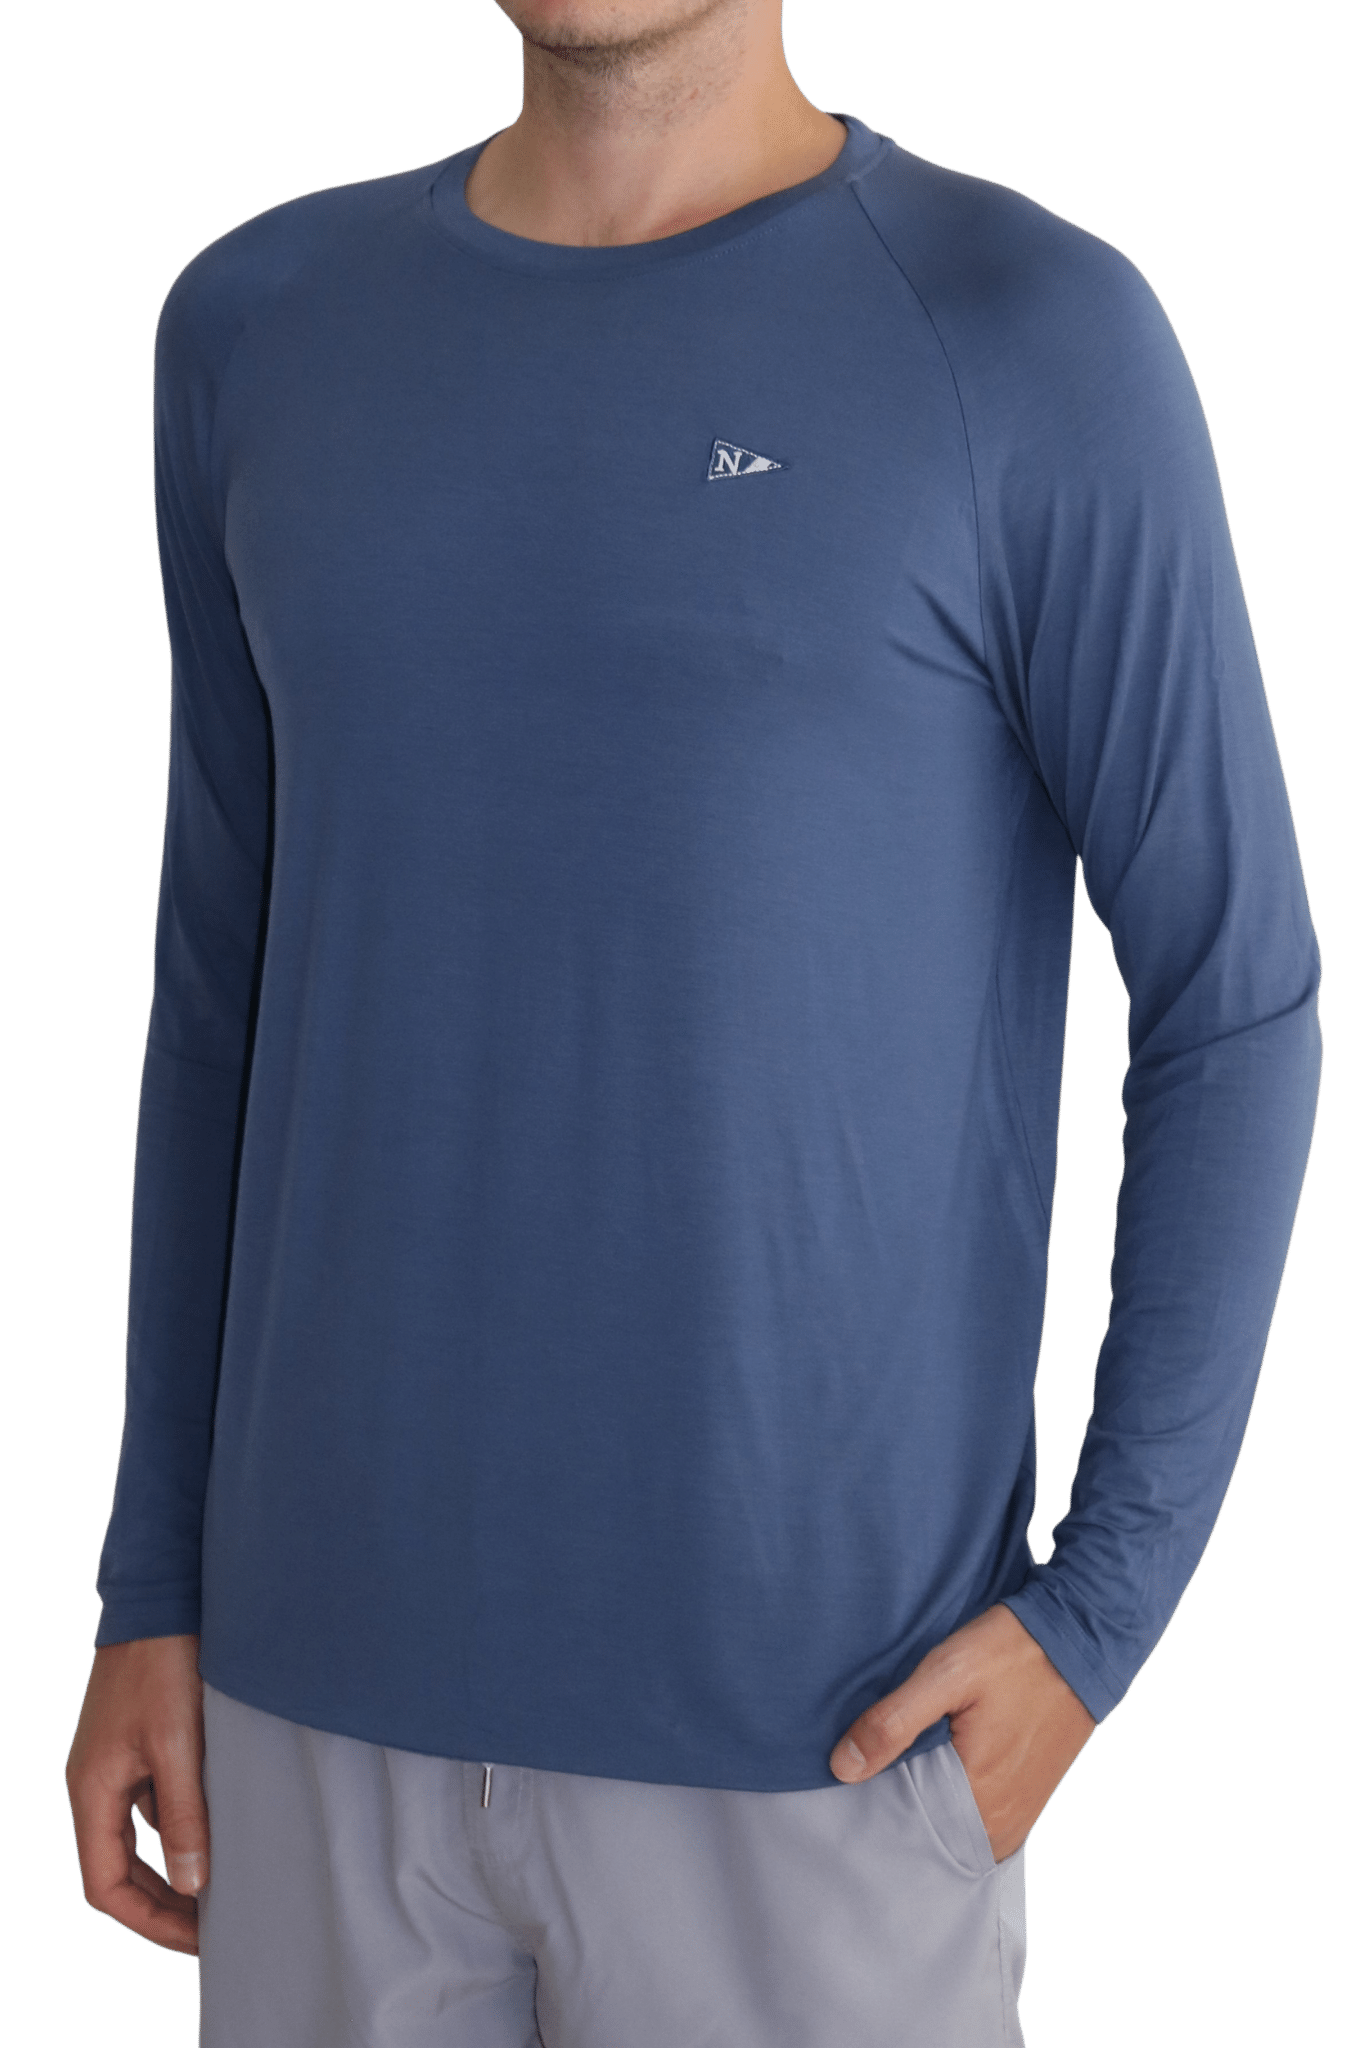 Front of the navy icon long sleeve bamboo shirt with 35+ UPF sun protection.